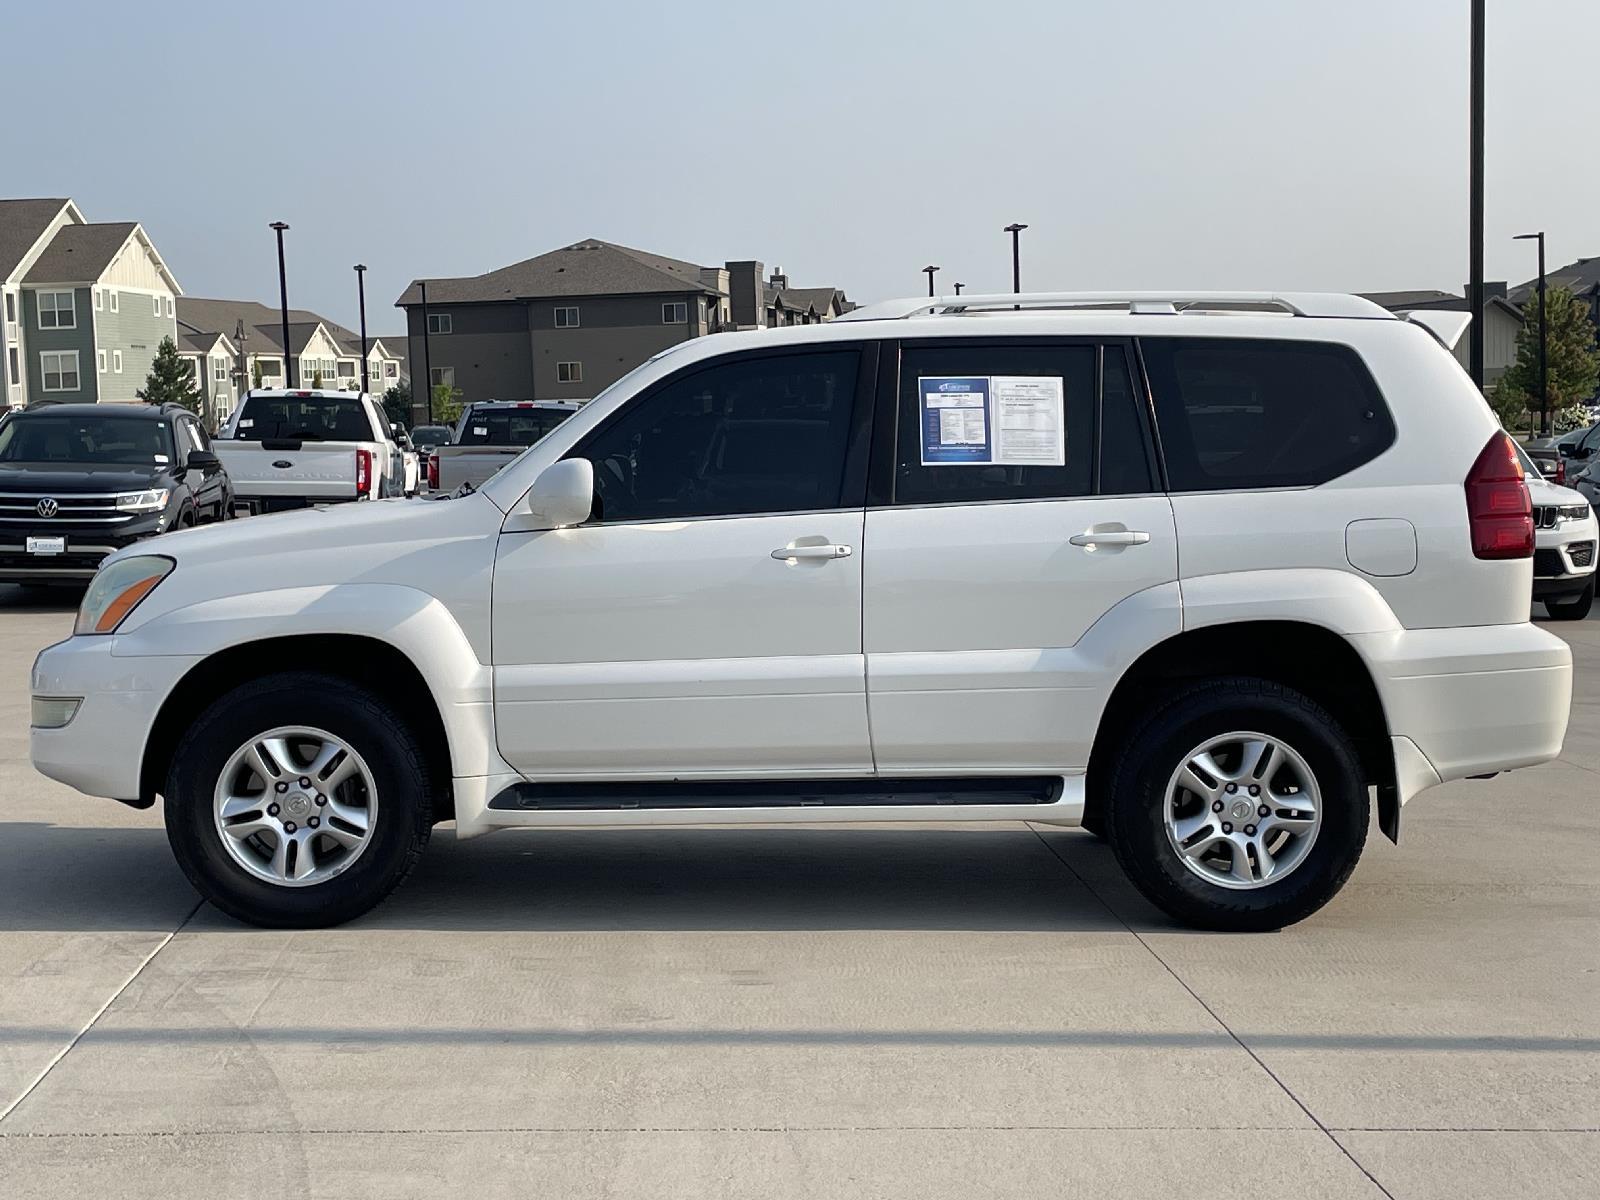 Used 2006 Lexus GX 470  SUV for sale in Lincoln NE